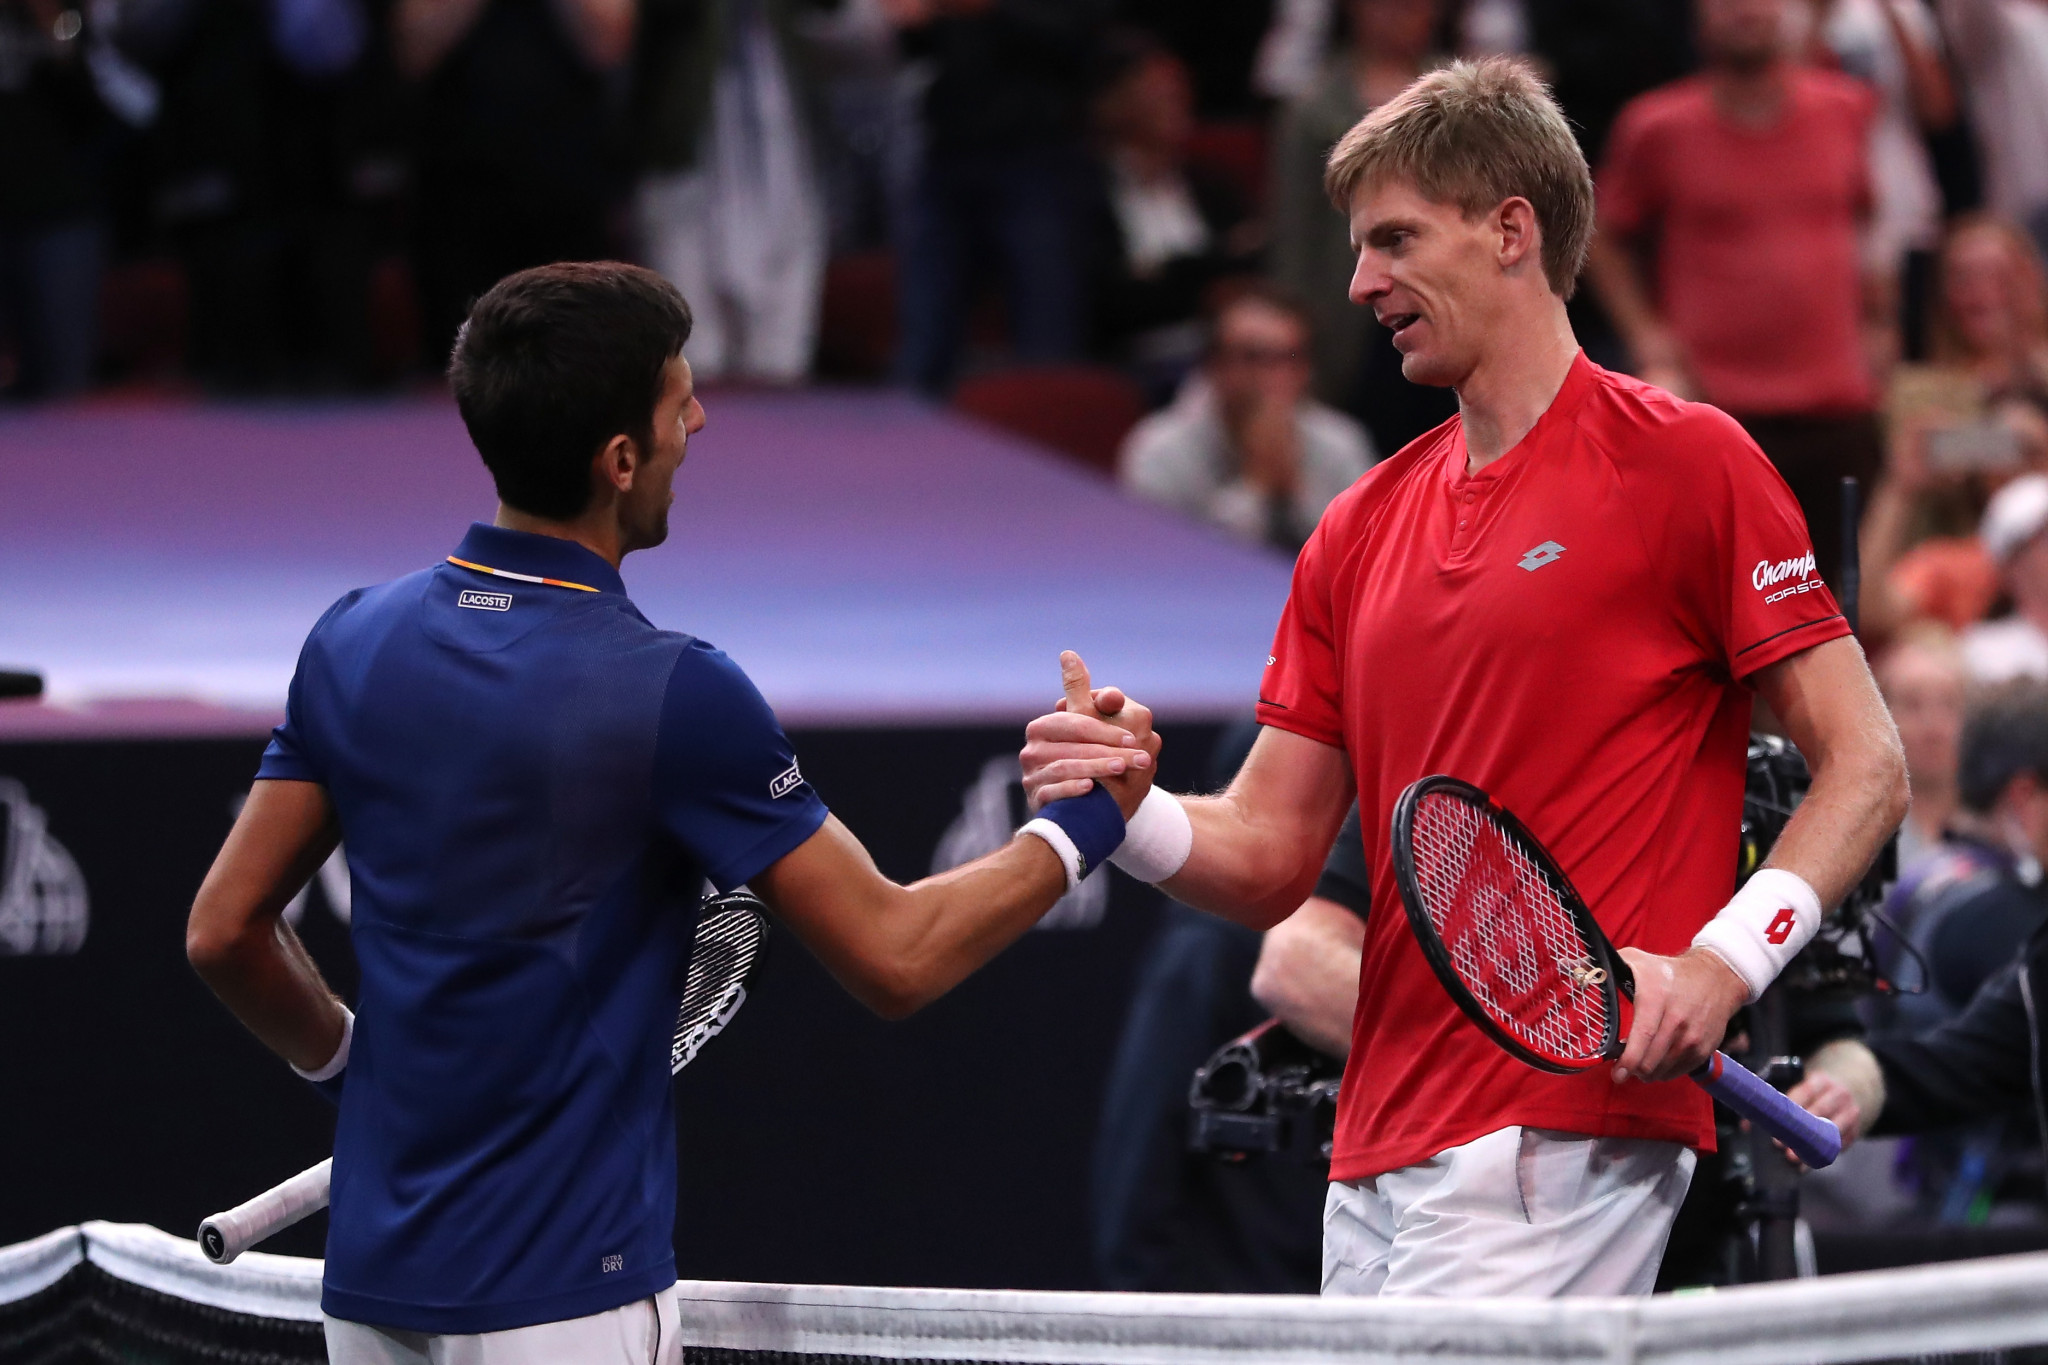 South Africa’s Kevin Anderson avenged his Wimbledon final defeat by Novak Djokovic on day two of the 2018 Laver Cup ©Getty Images